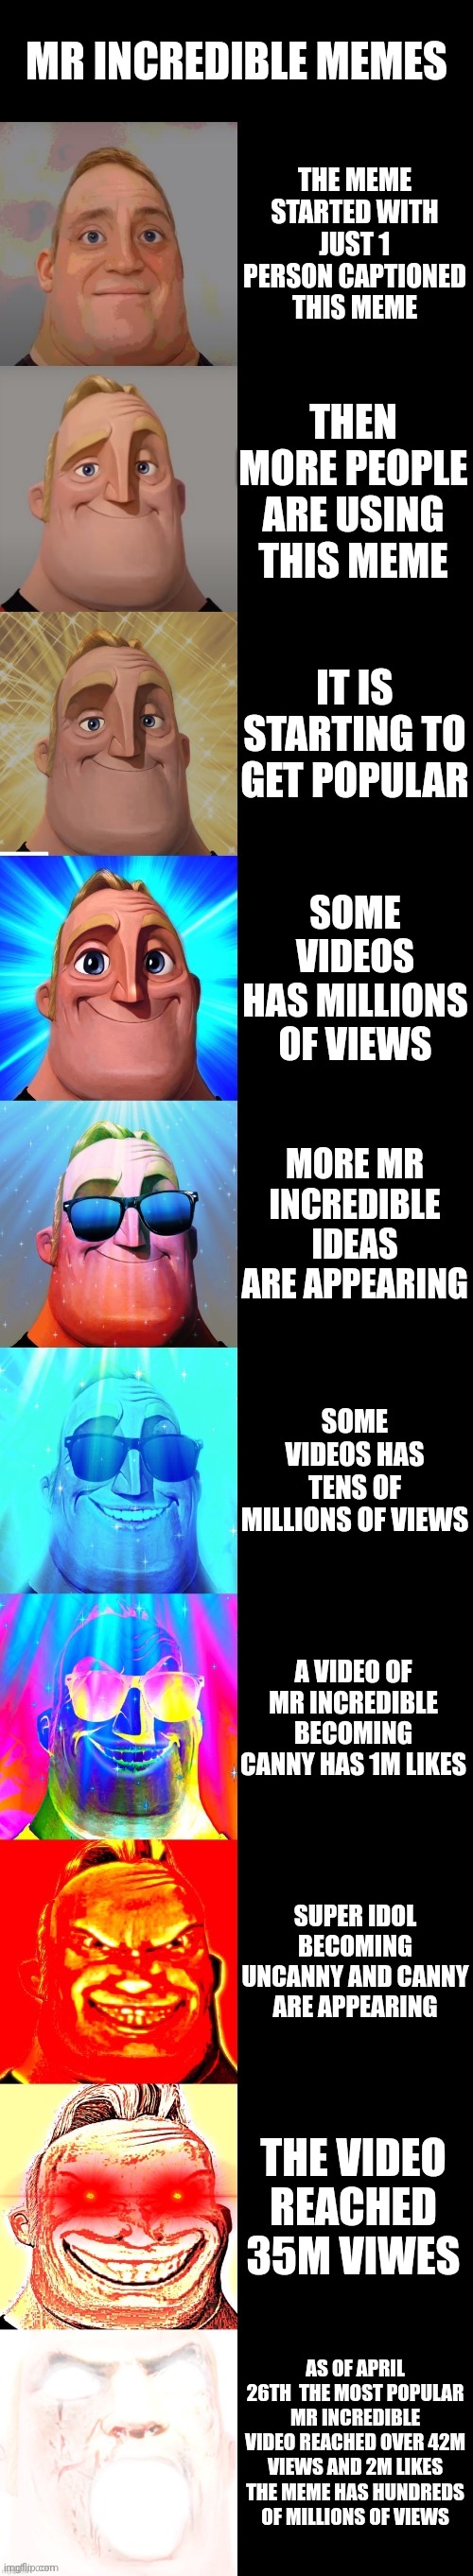 mr incredible becoming uncanny FACTS #fyp #popu #viral #meme